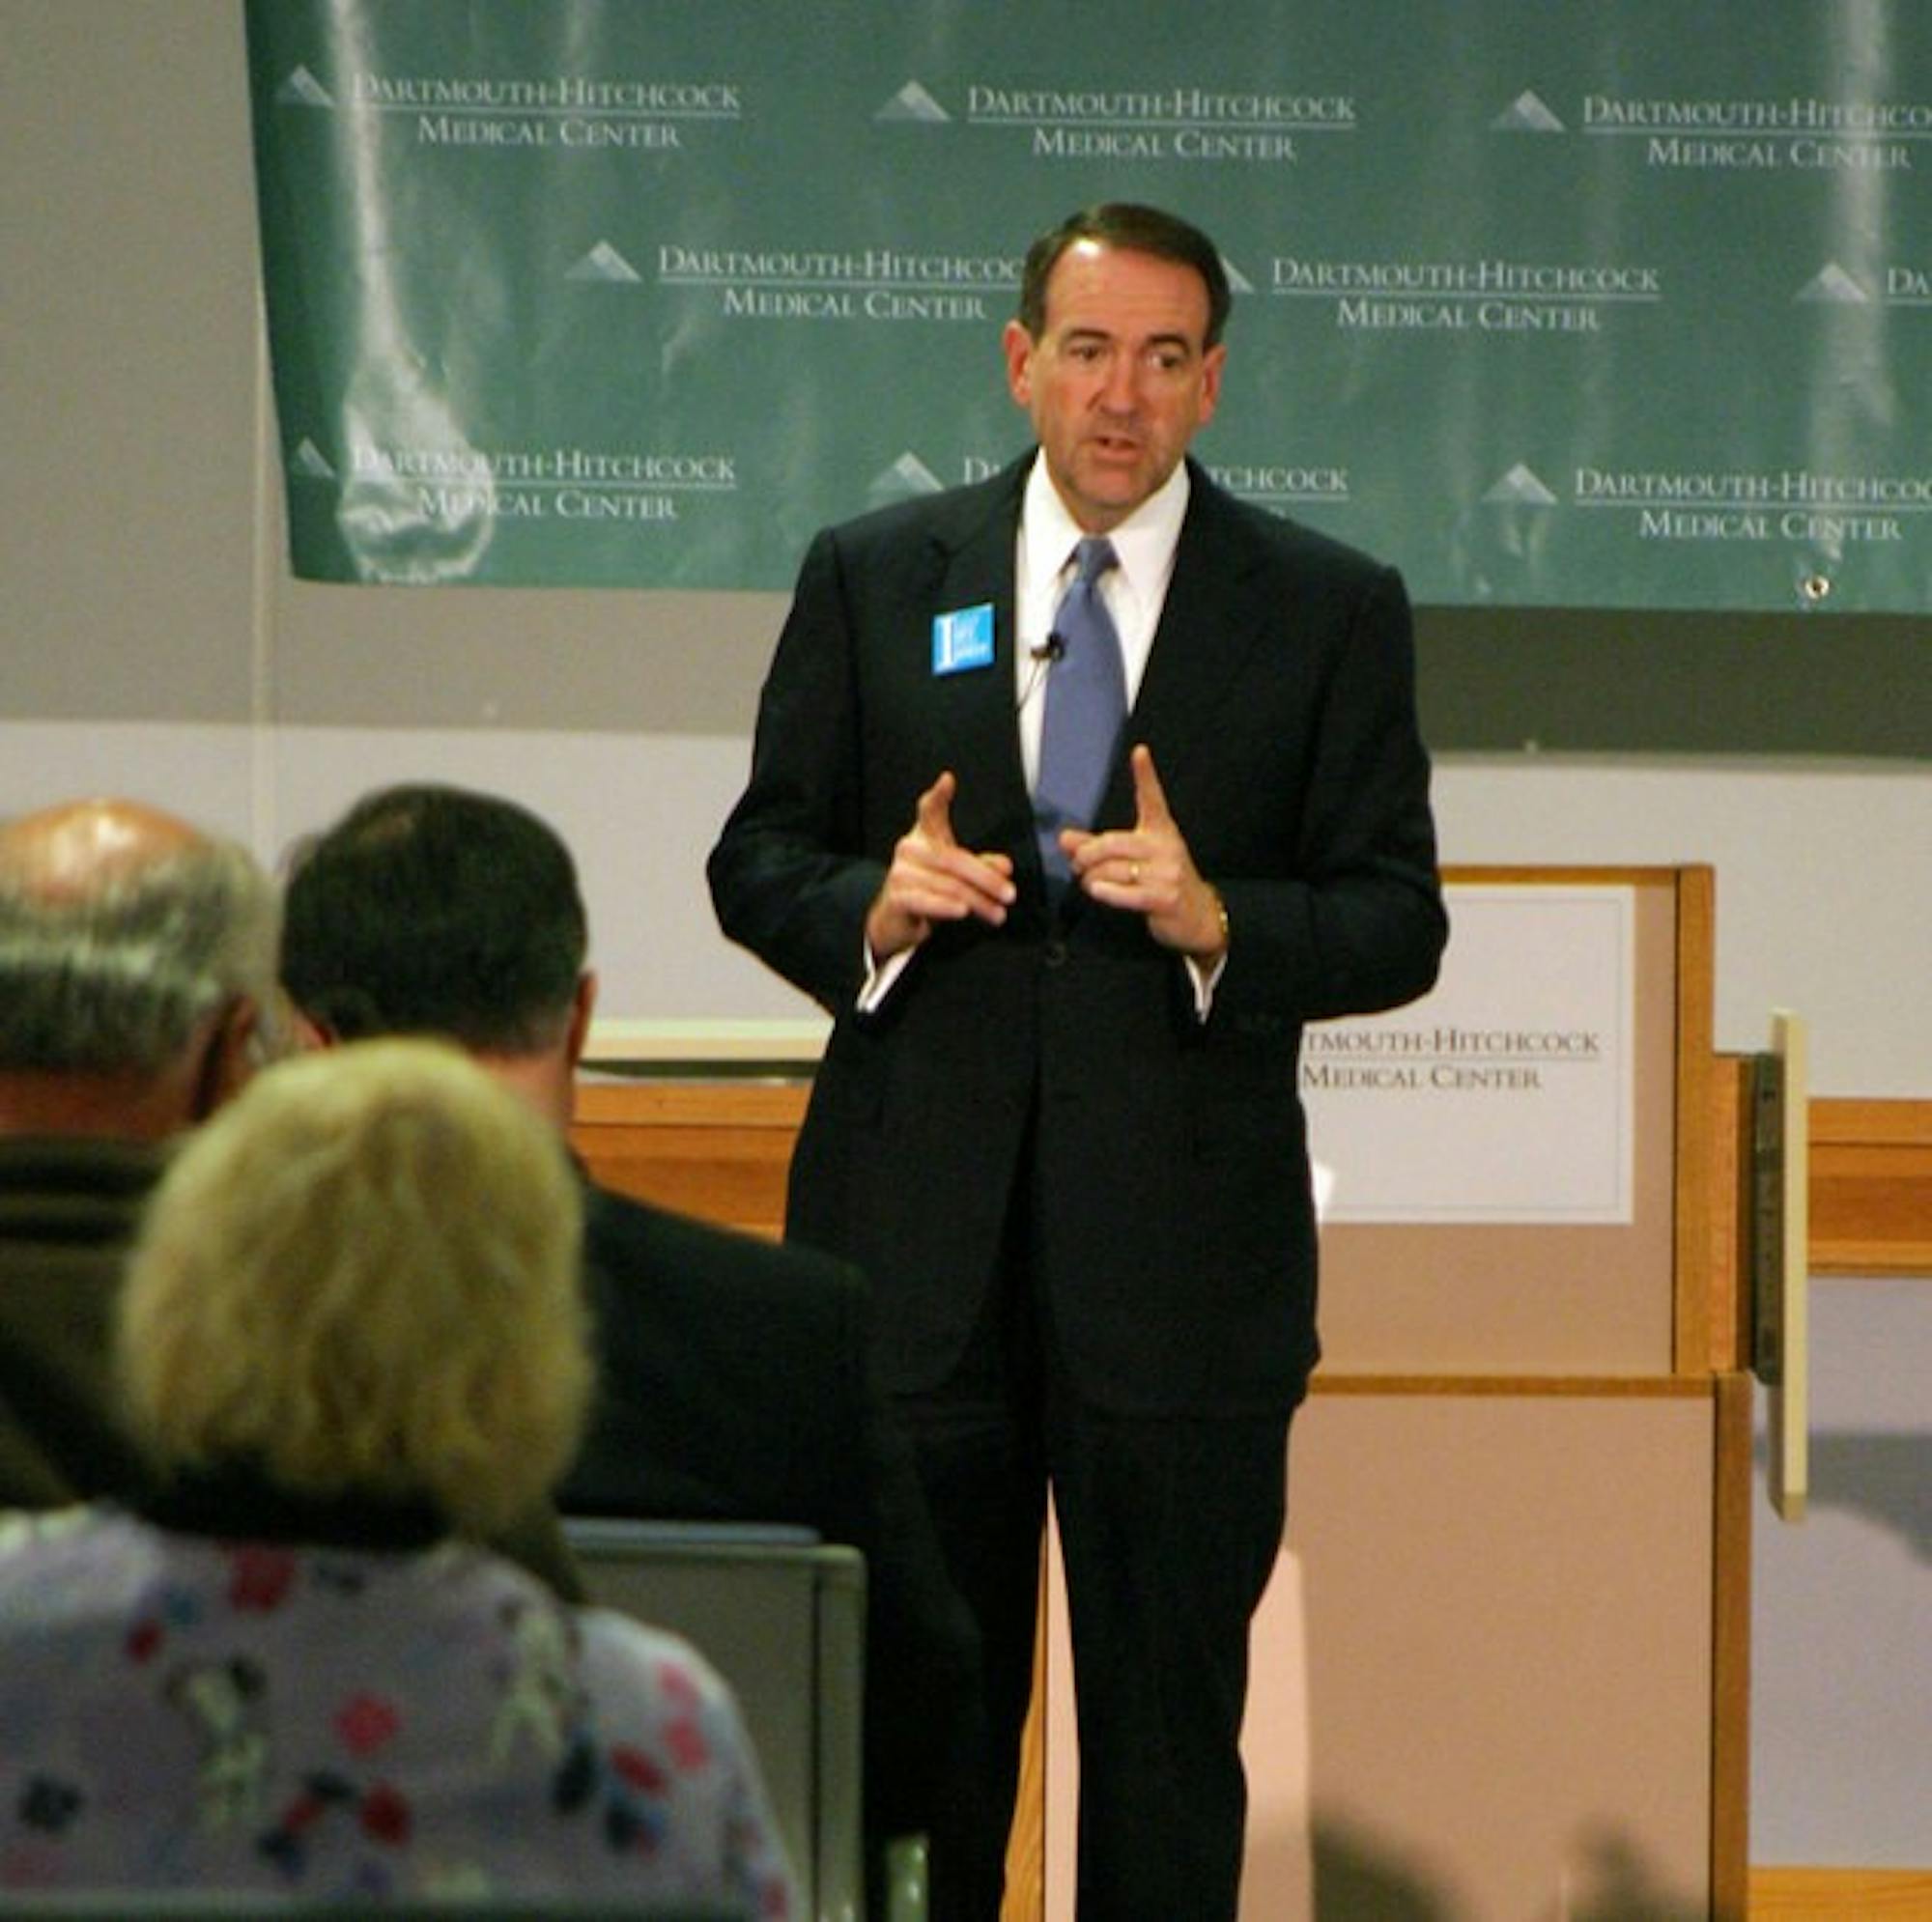 Presidential hopeful and former governor Mike Huckabee, R-Ark., addressed residents, doctors and staff of Dartmouth-Hitchcock Medical Center Friday.